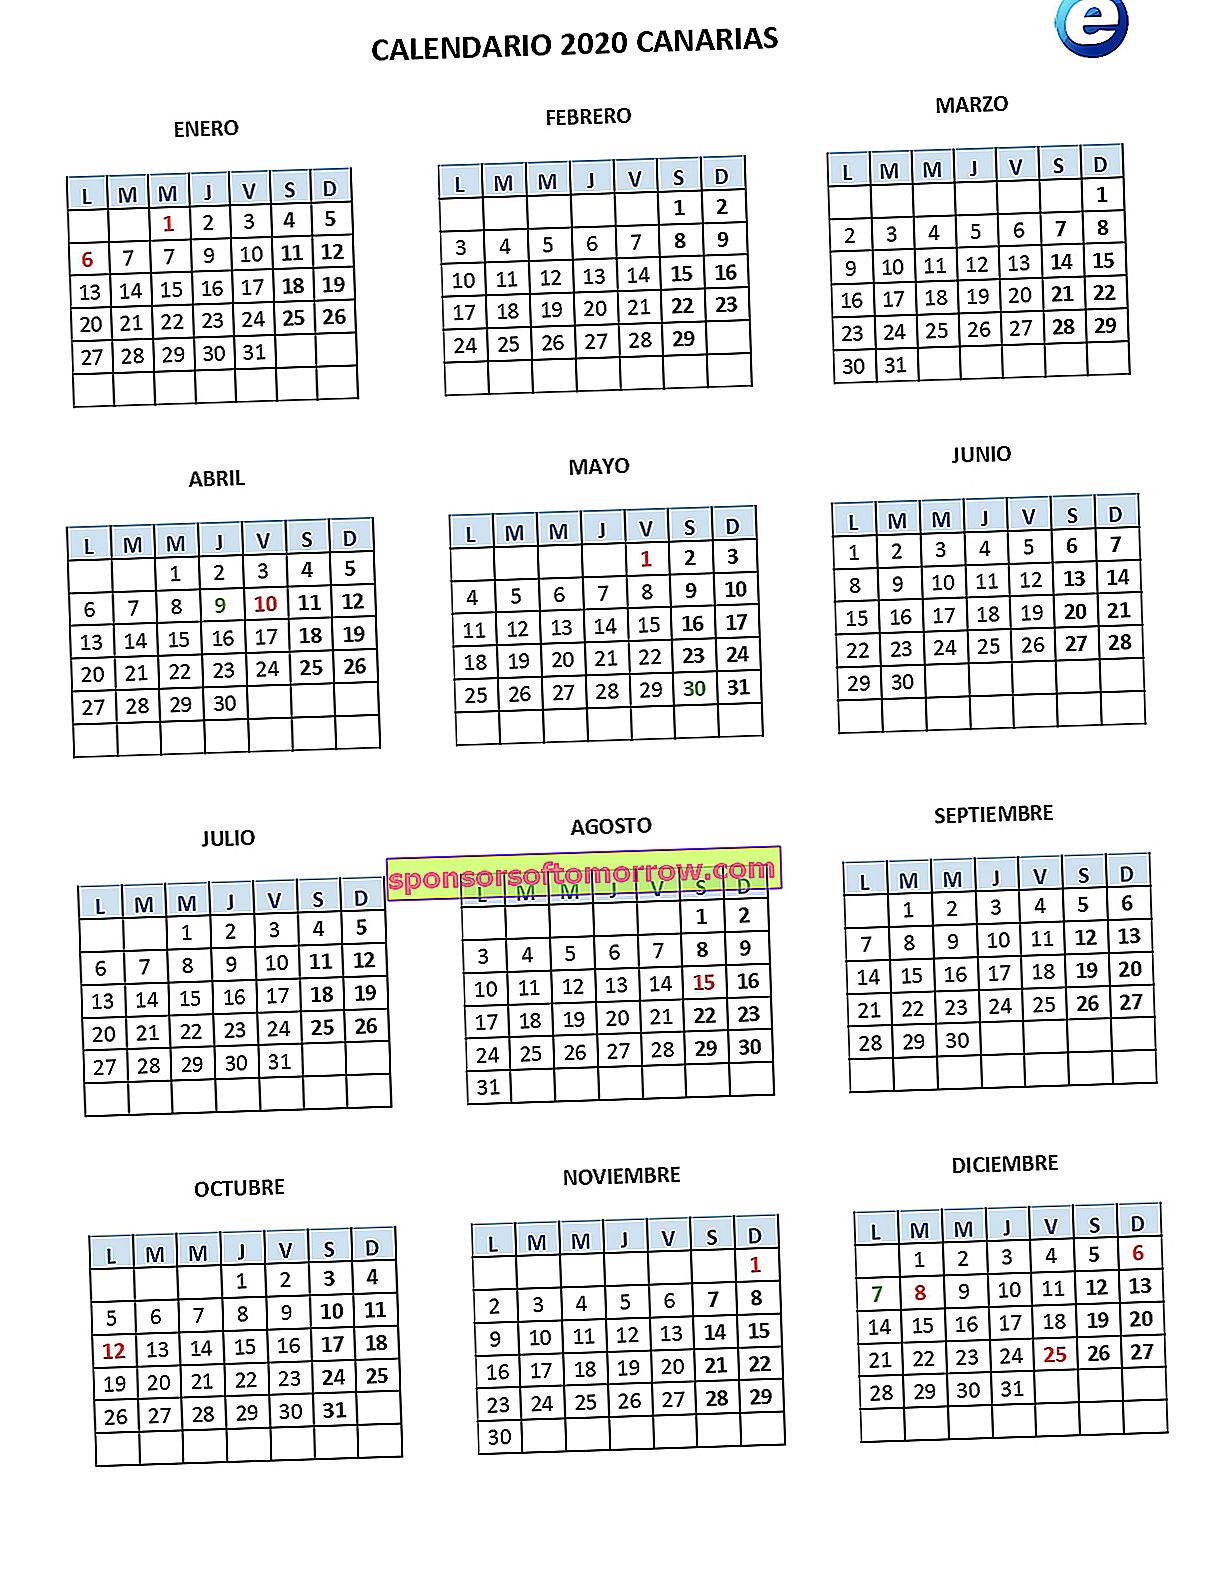 CALENDRIER DES CANARIES 2020 _pages-to-jpg-0001